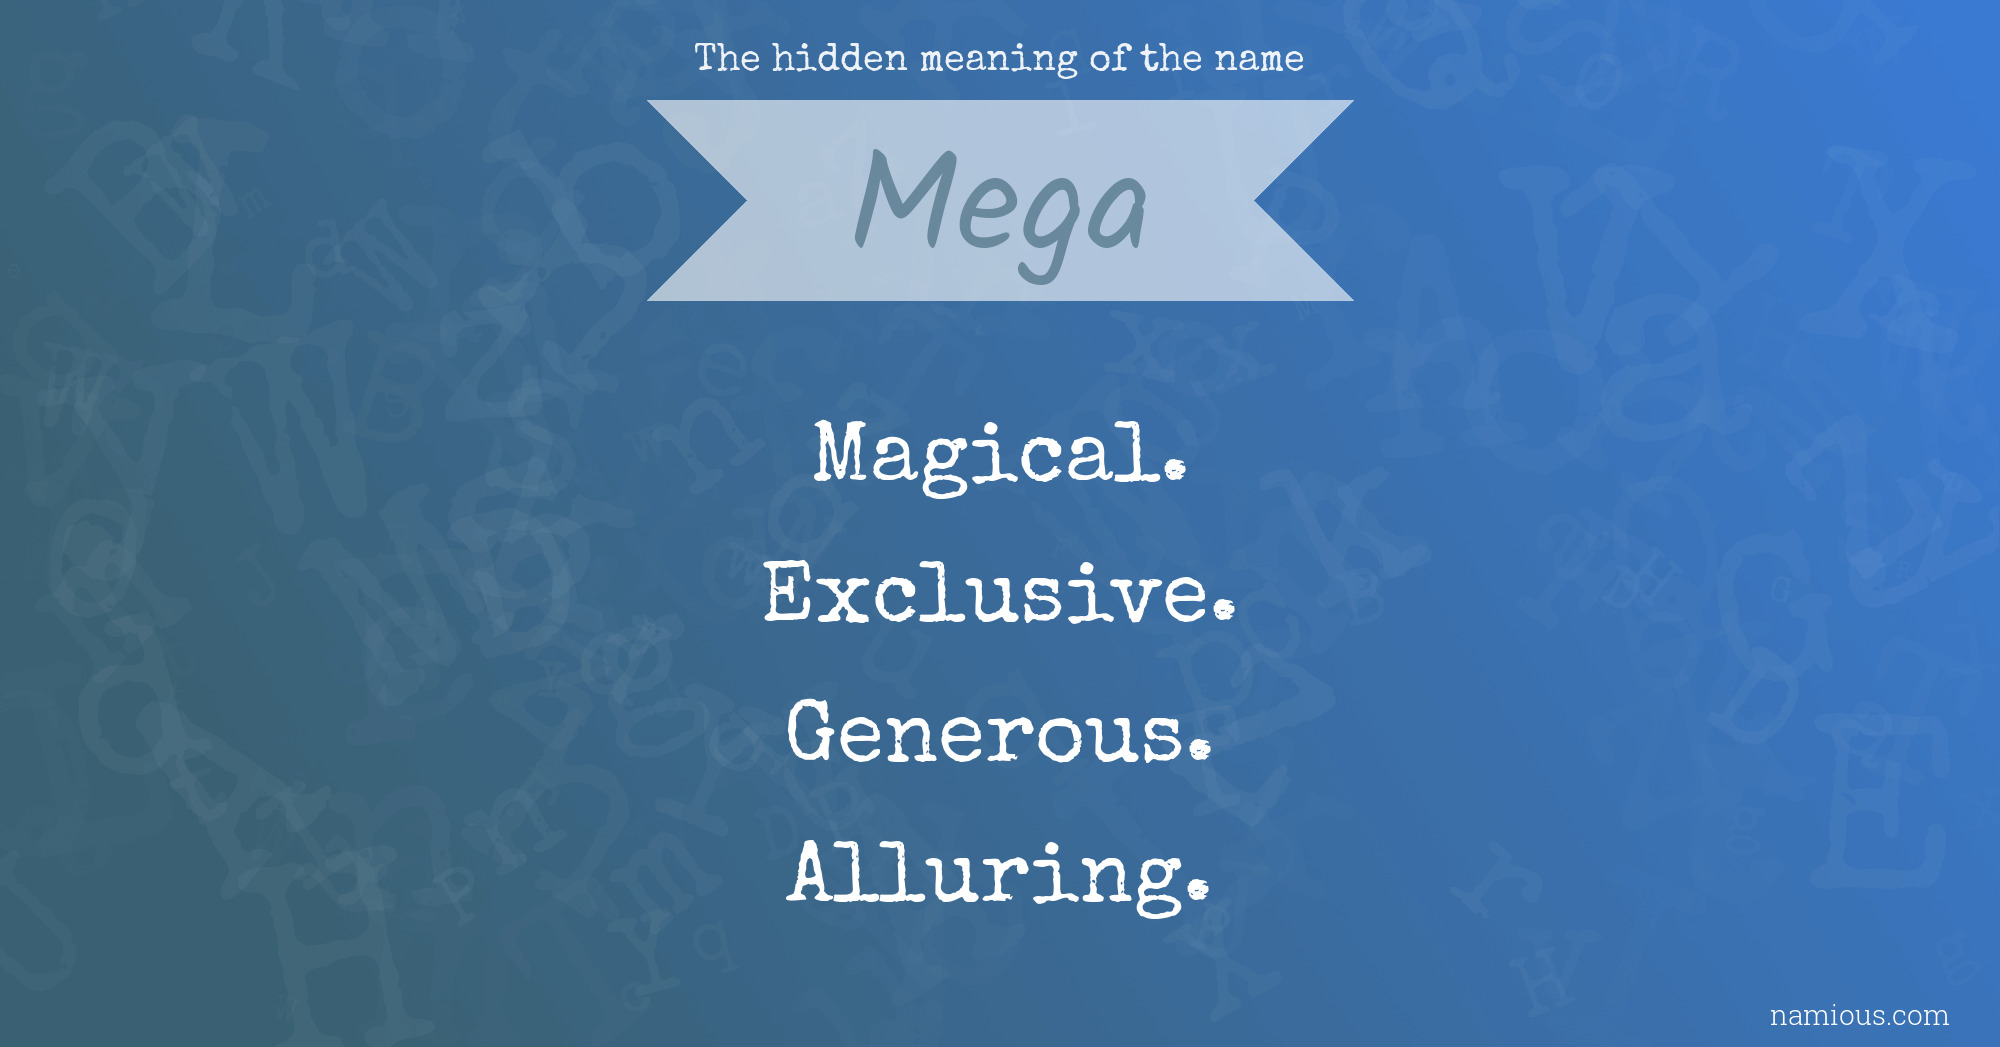 The hidden meaning of the name Mega